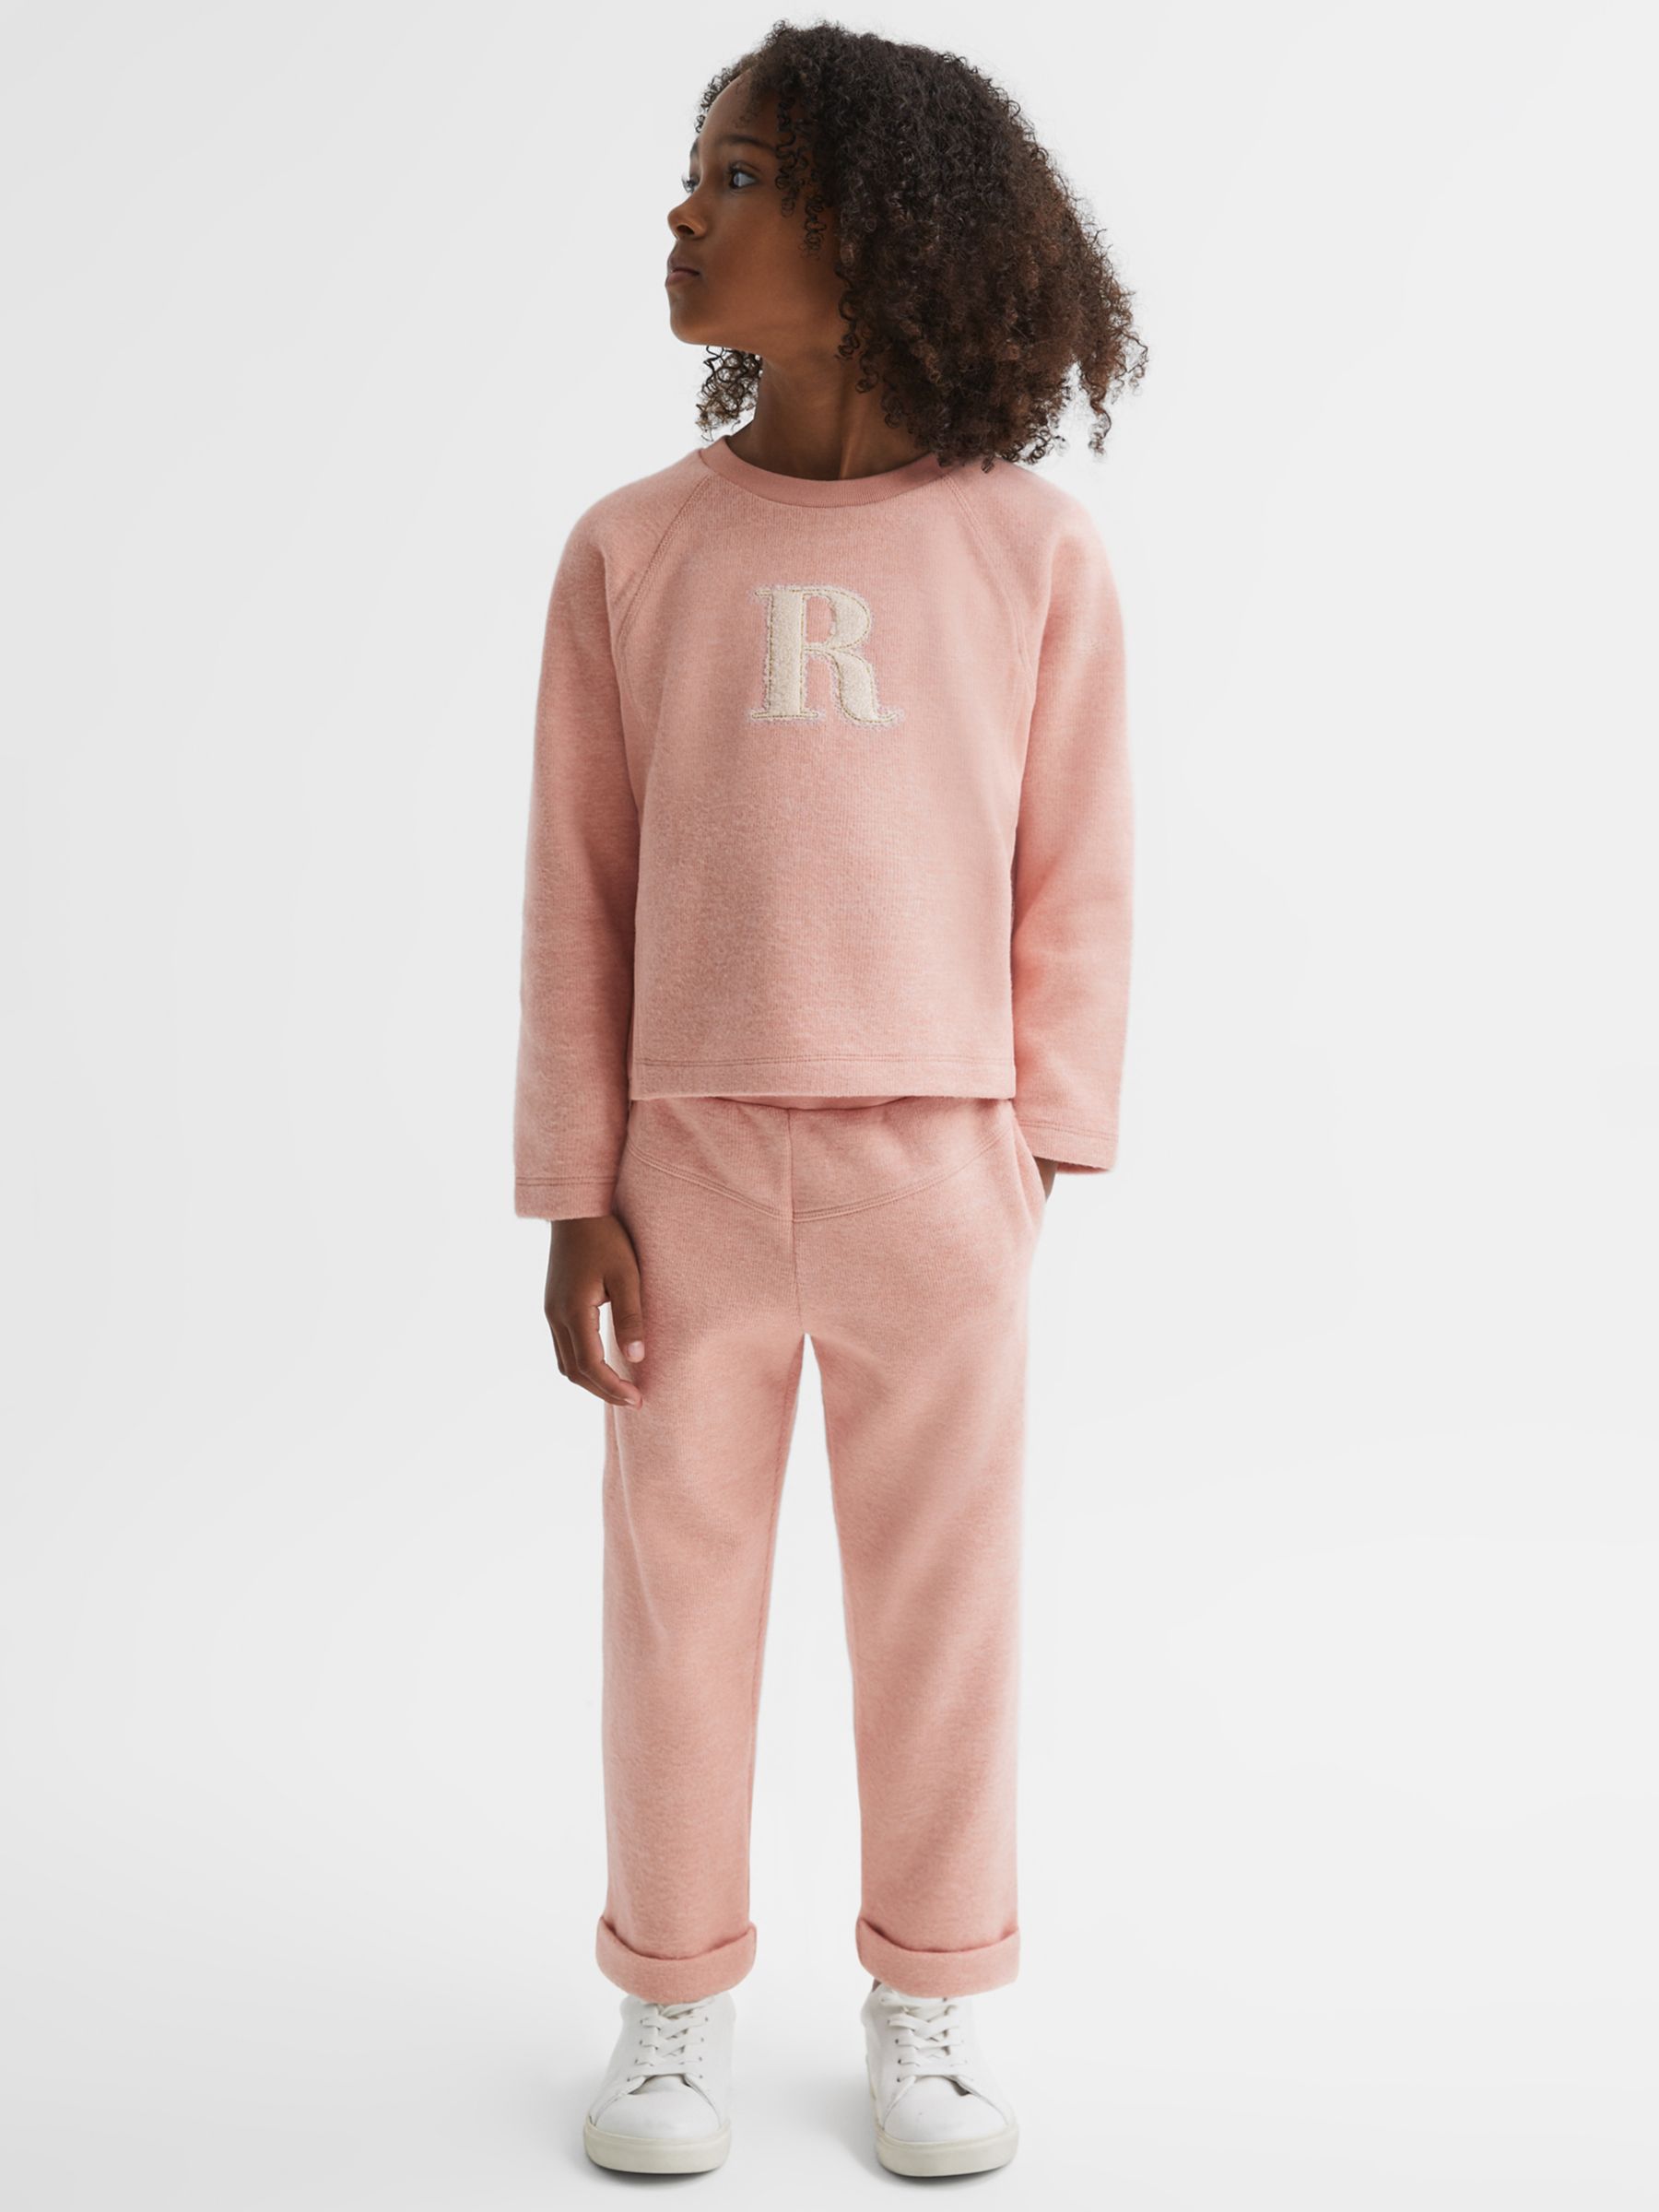 Buy Reiss Kids' Valencia Knitted Joggers, Apricot Online at johnlewis.com